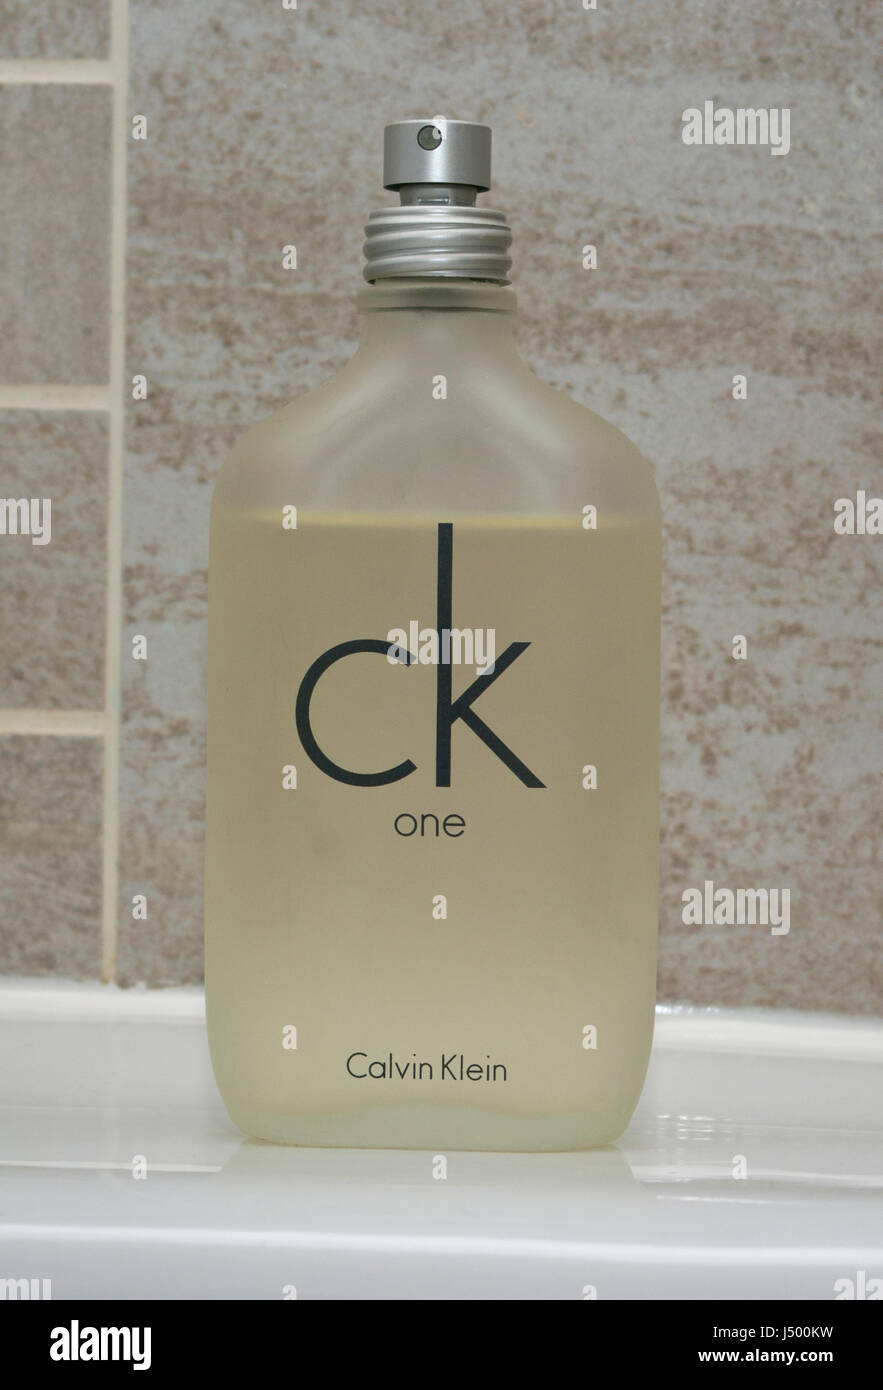 Glass Bottle Spray Of Calvin Klein Products CK1 Aftershave Mens Toiletries Stock Photo